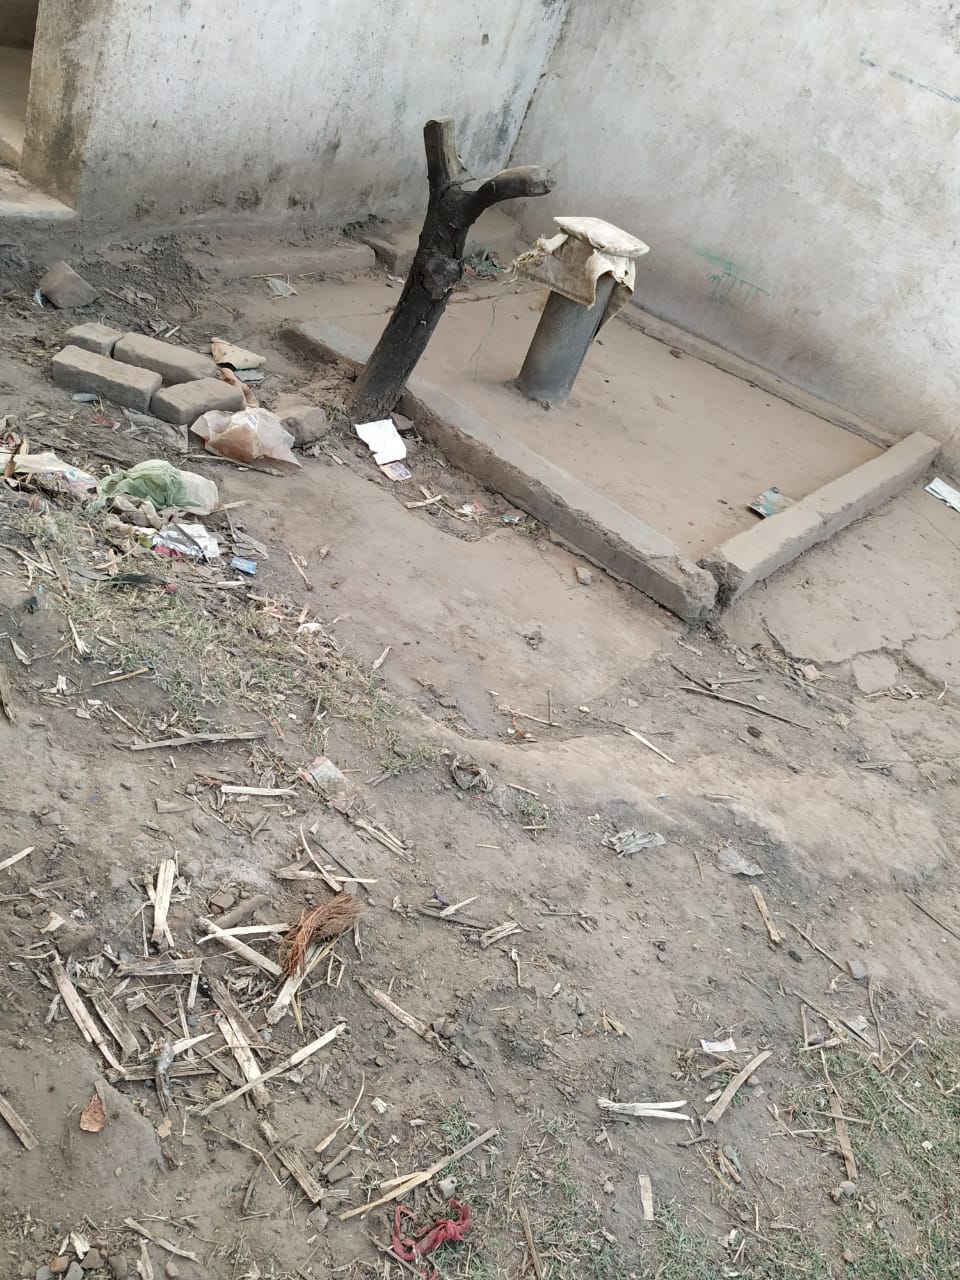 The village is forced to drink river water due to negligence